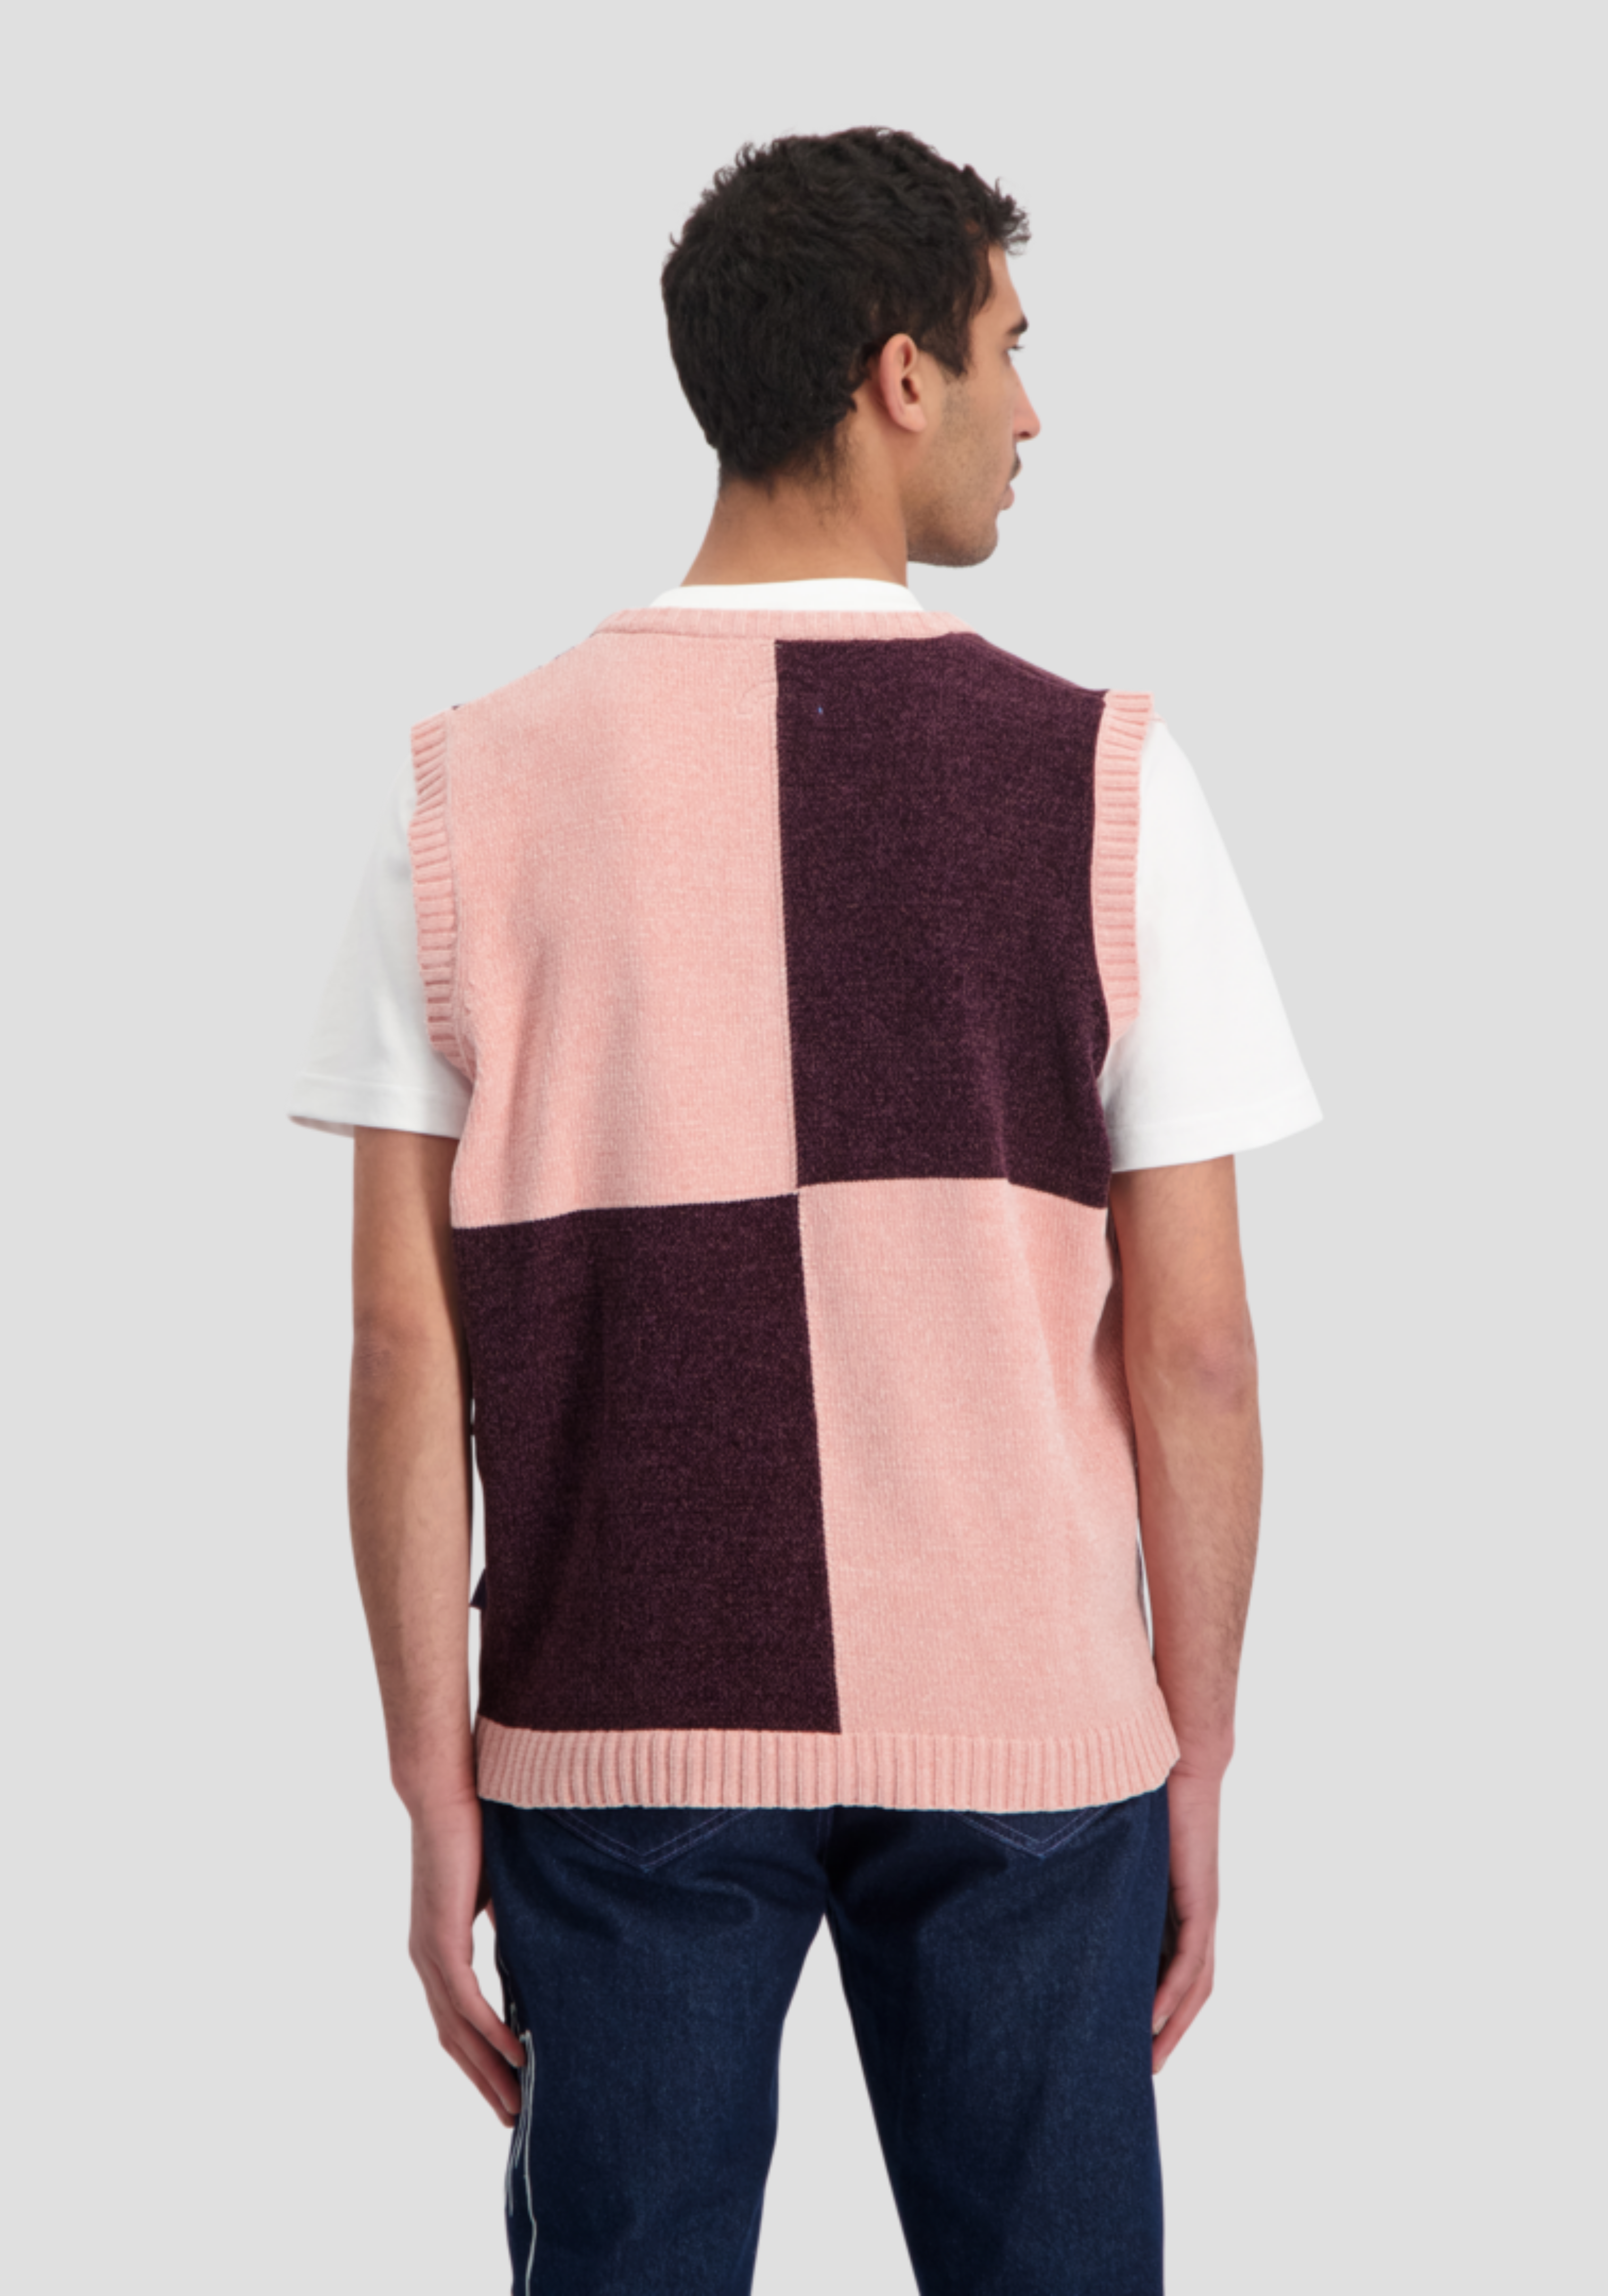 Square Spencer Knits